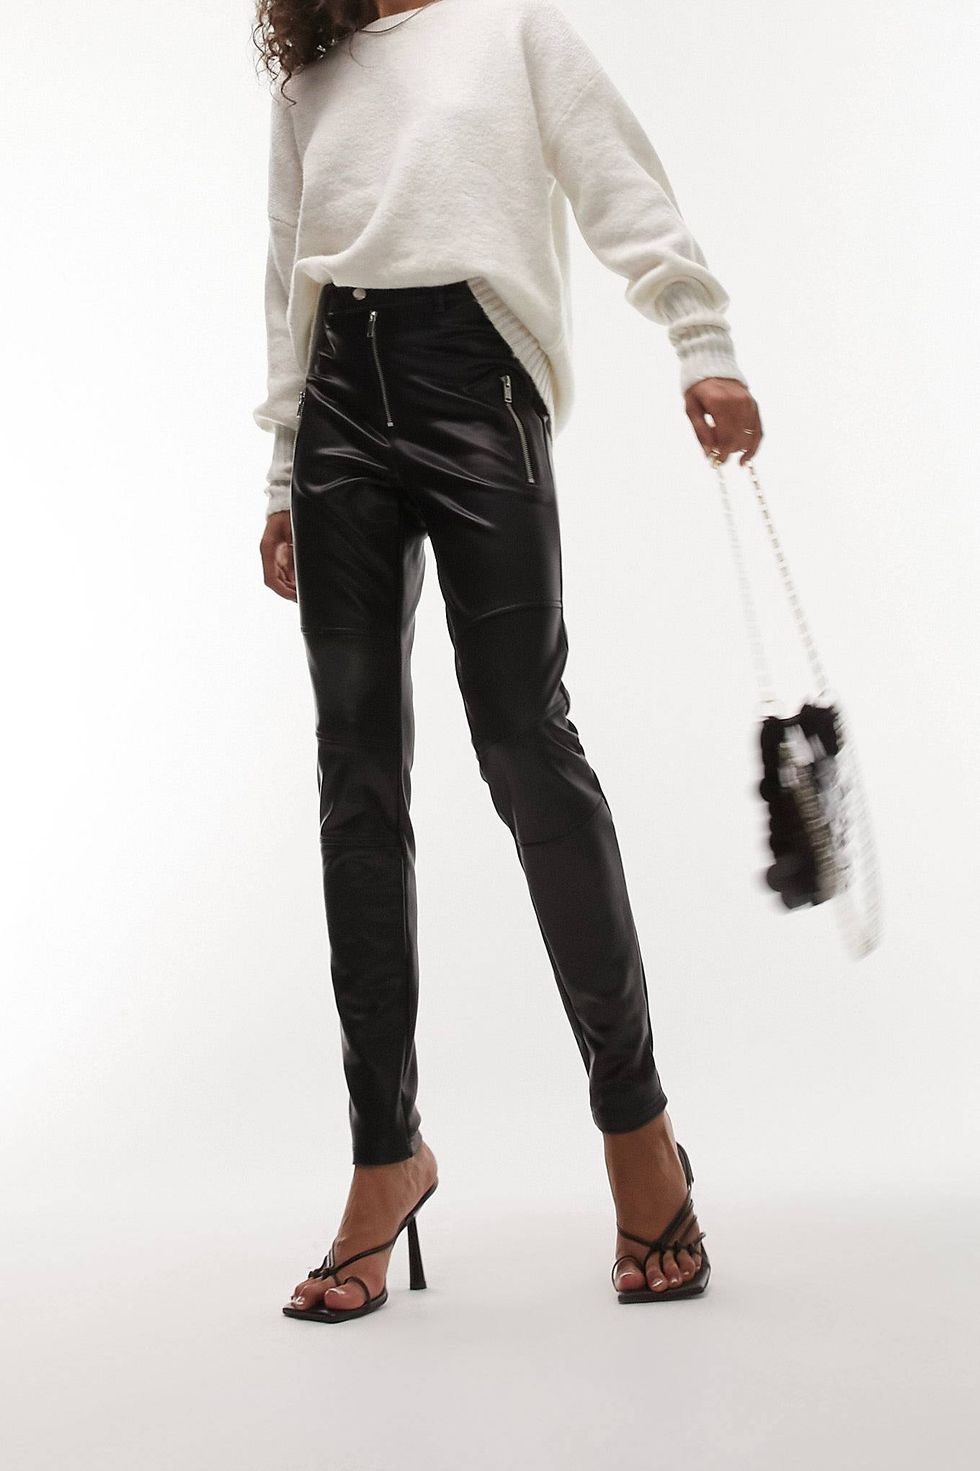 How to Style Leather Pants 2024 - Leather Pants Outfit Ideas